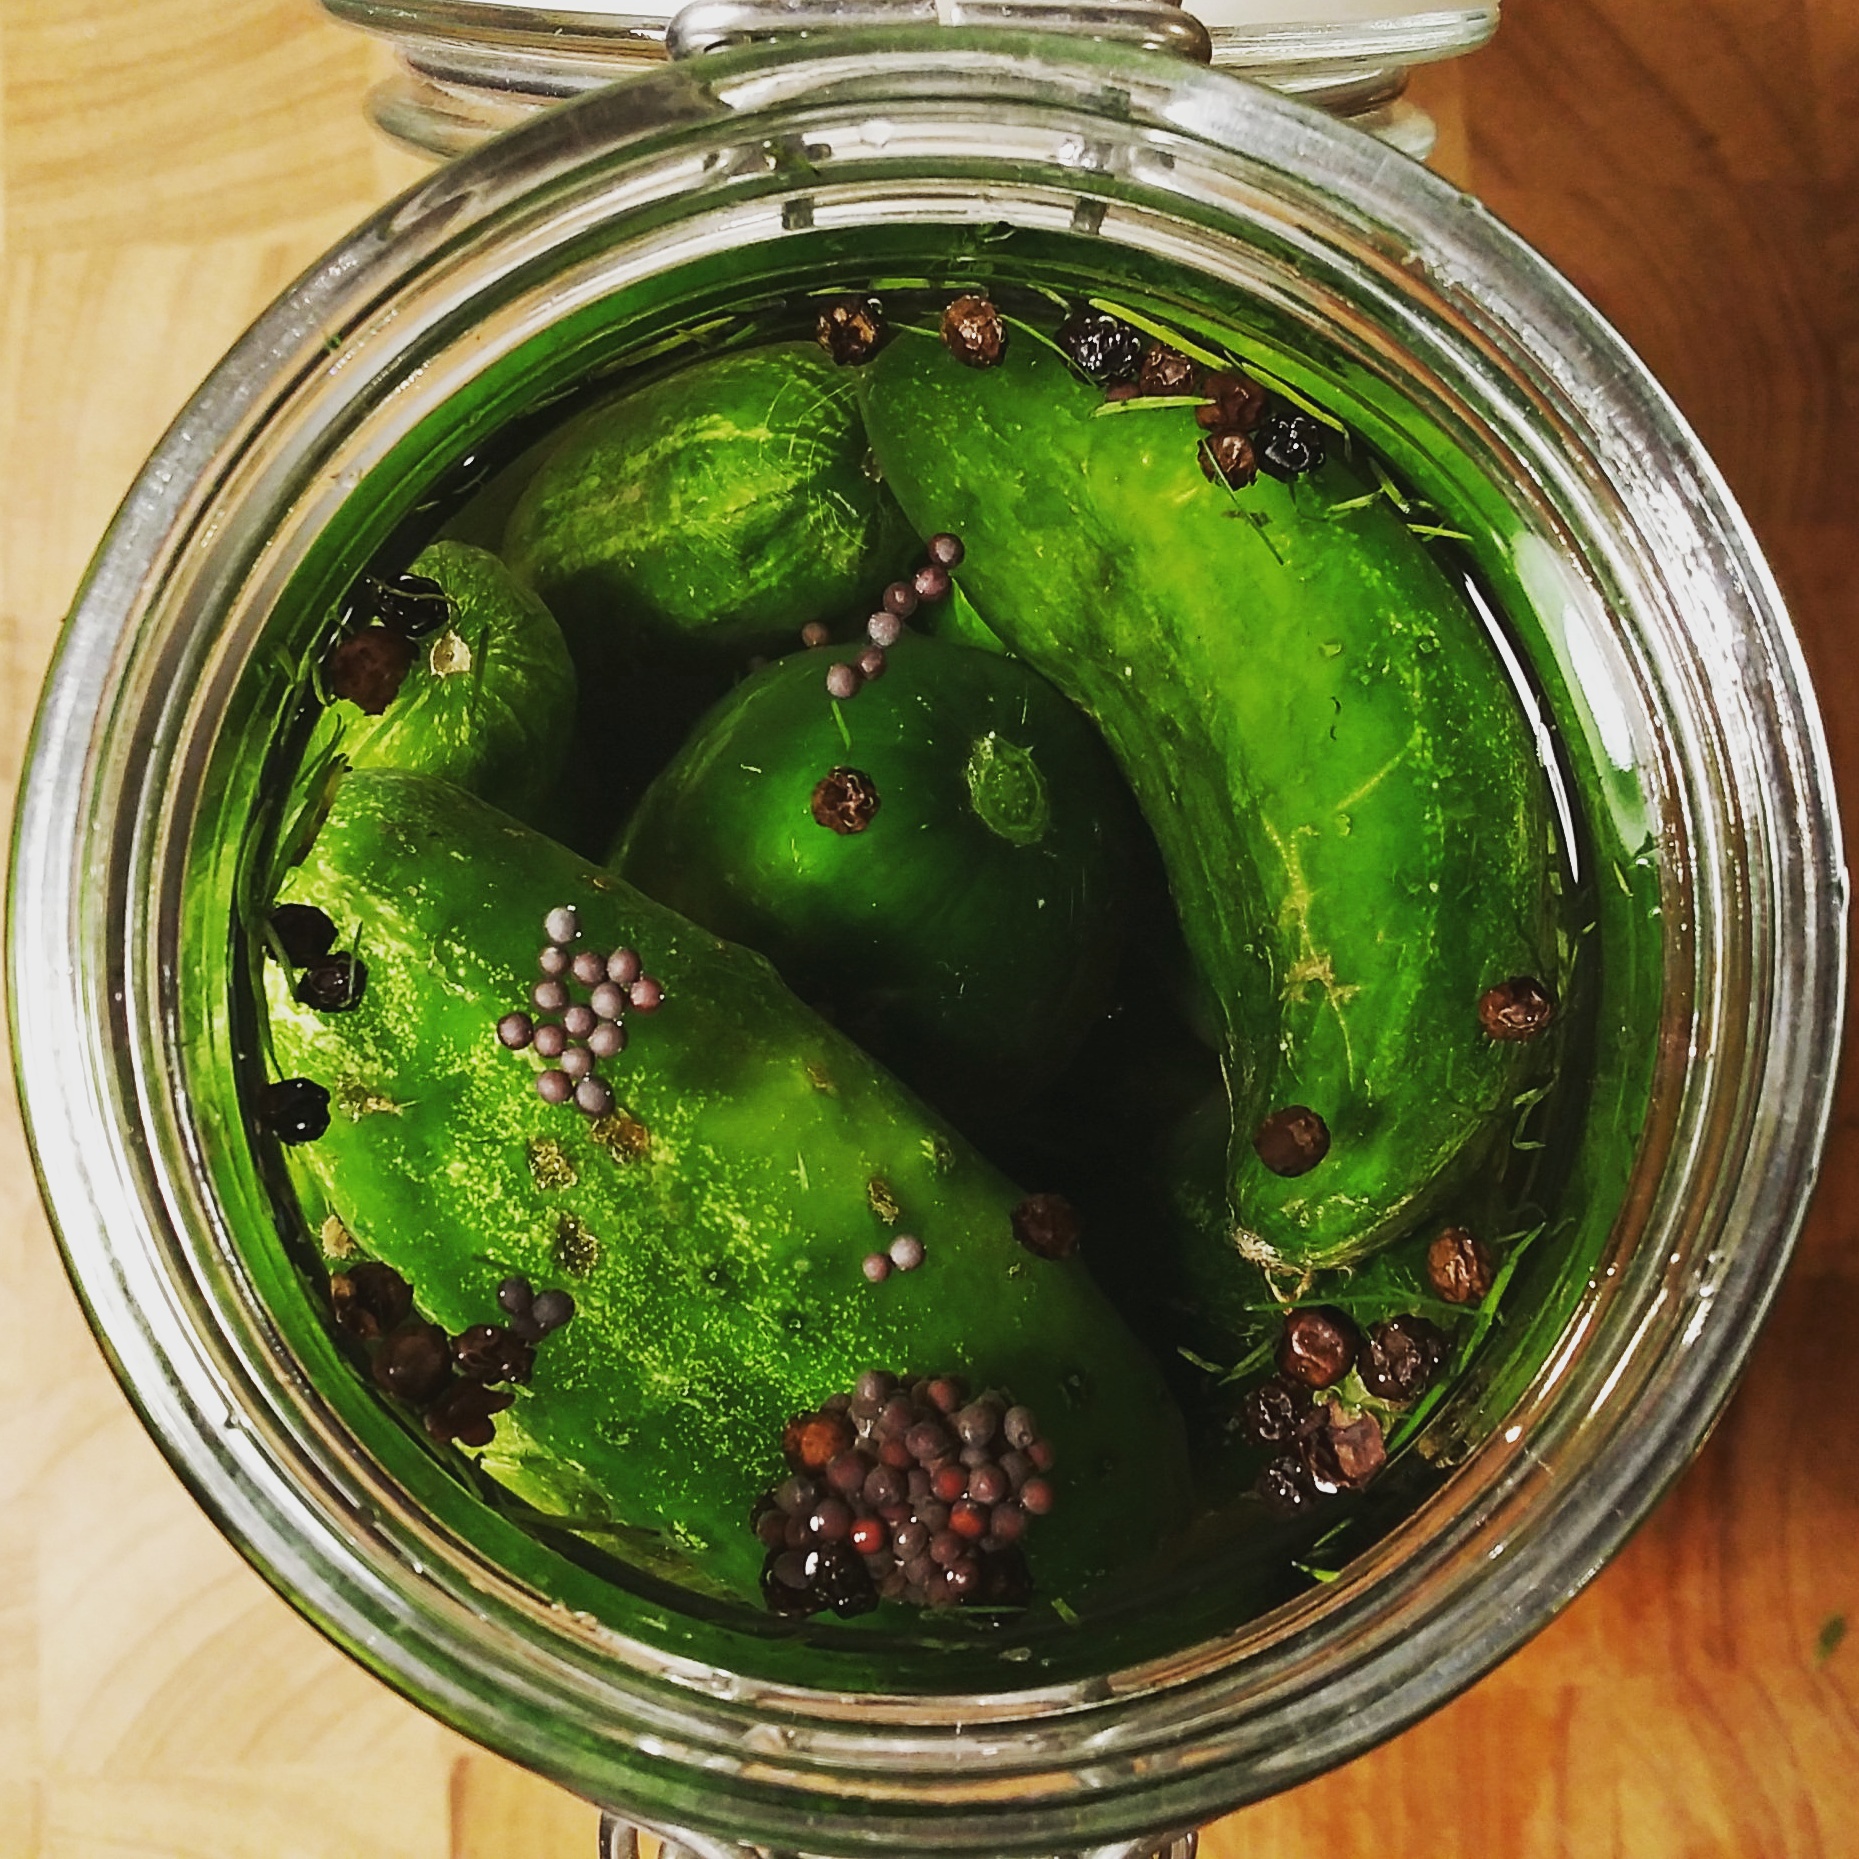 Top view of a jar of small cucumbers prepped for garlic dill pickles